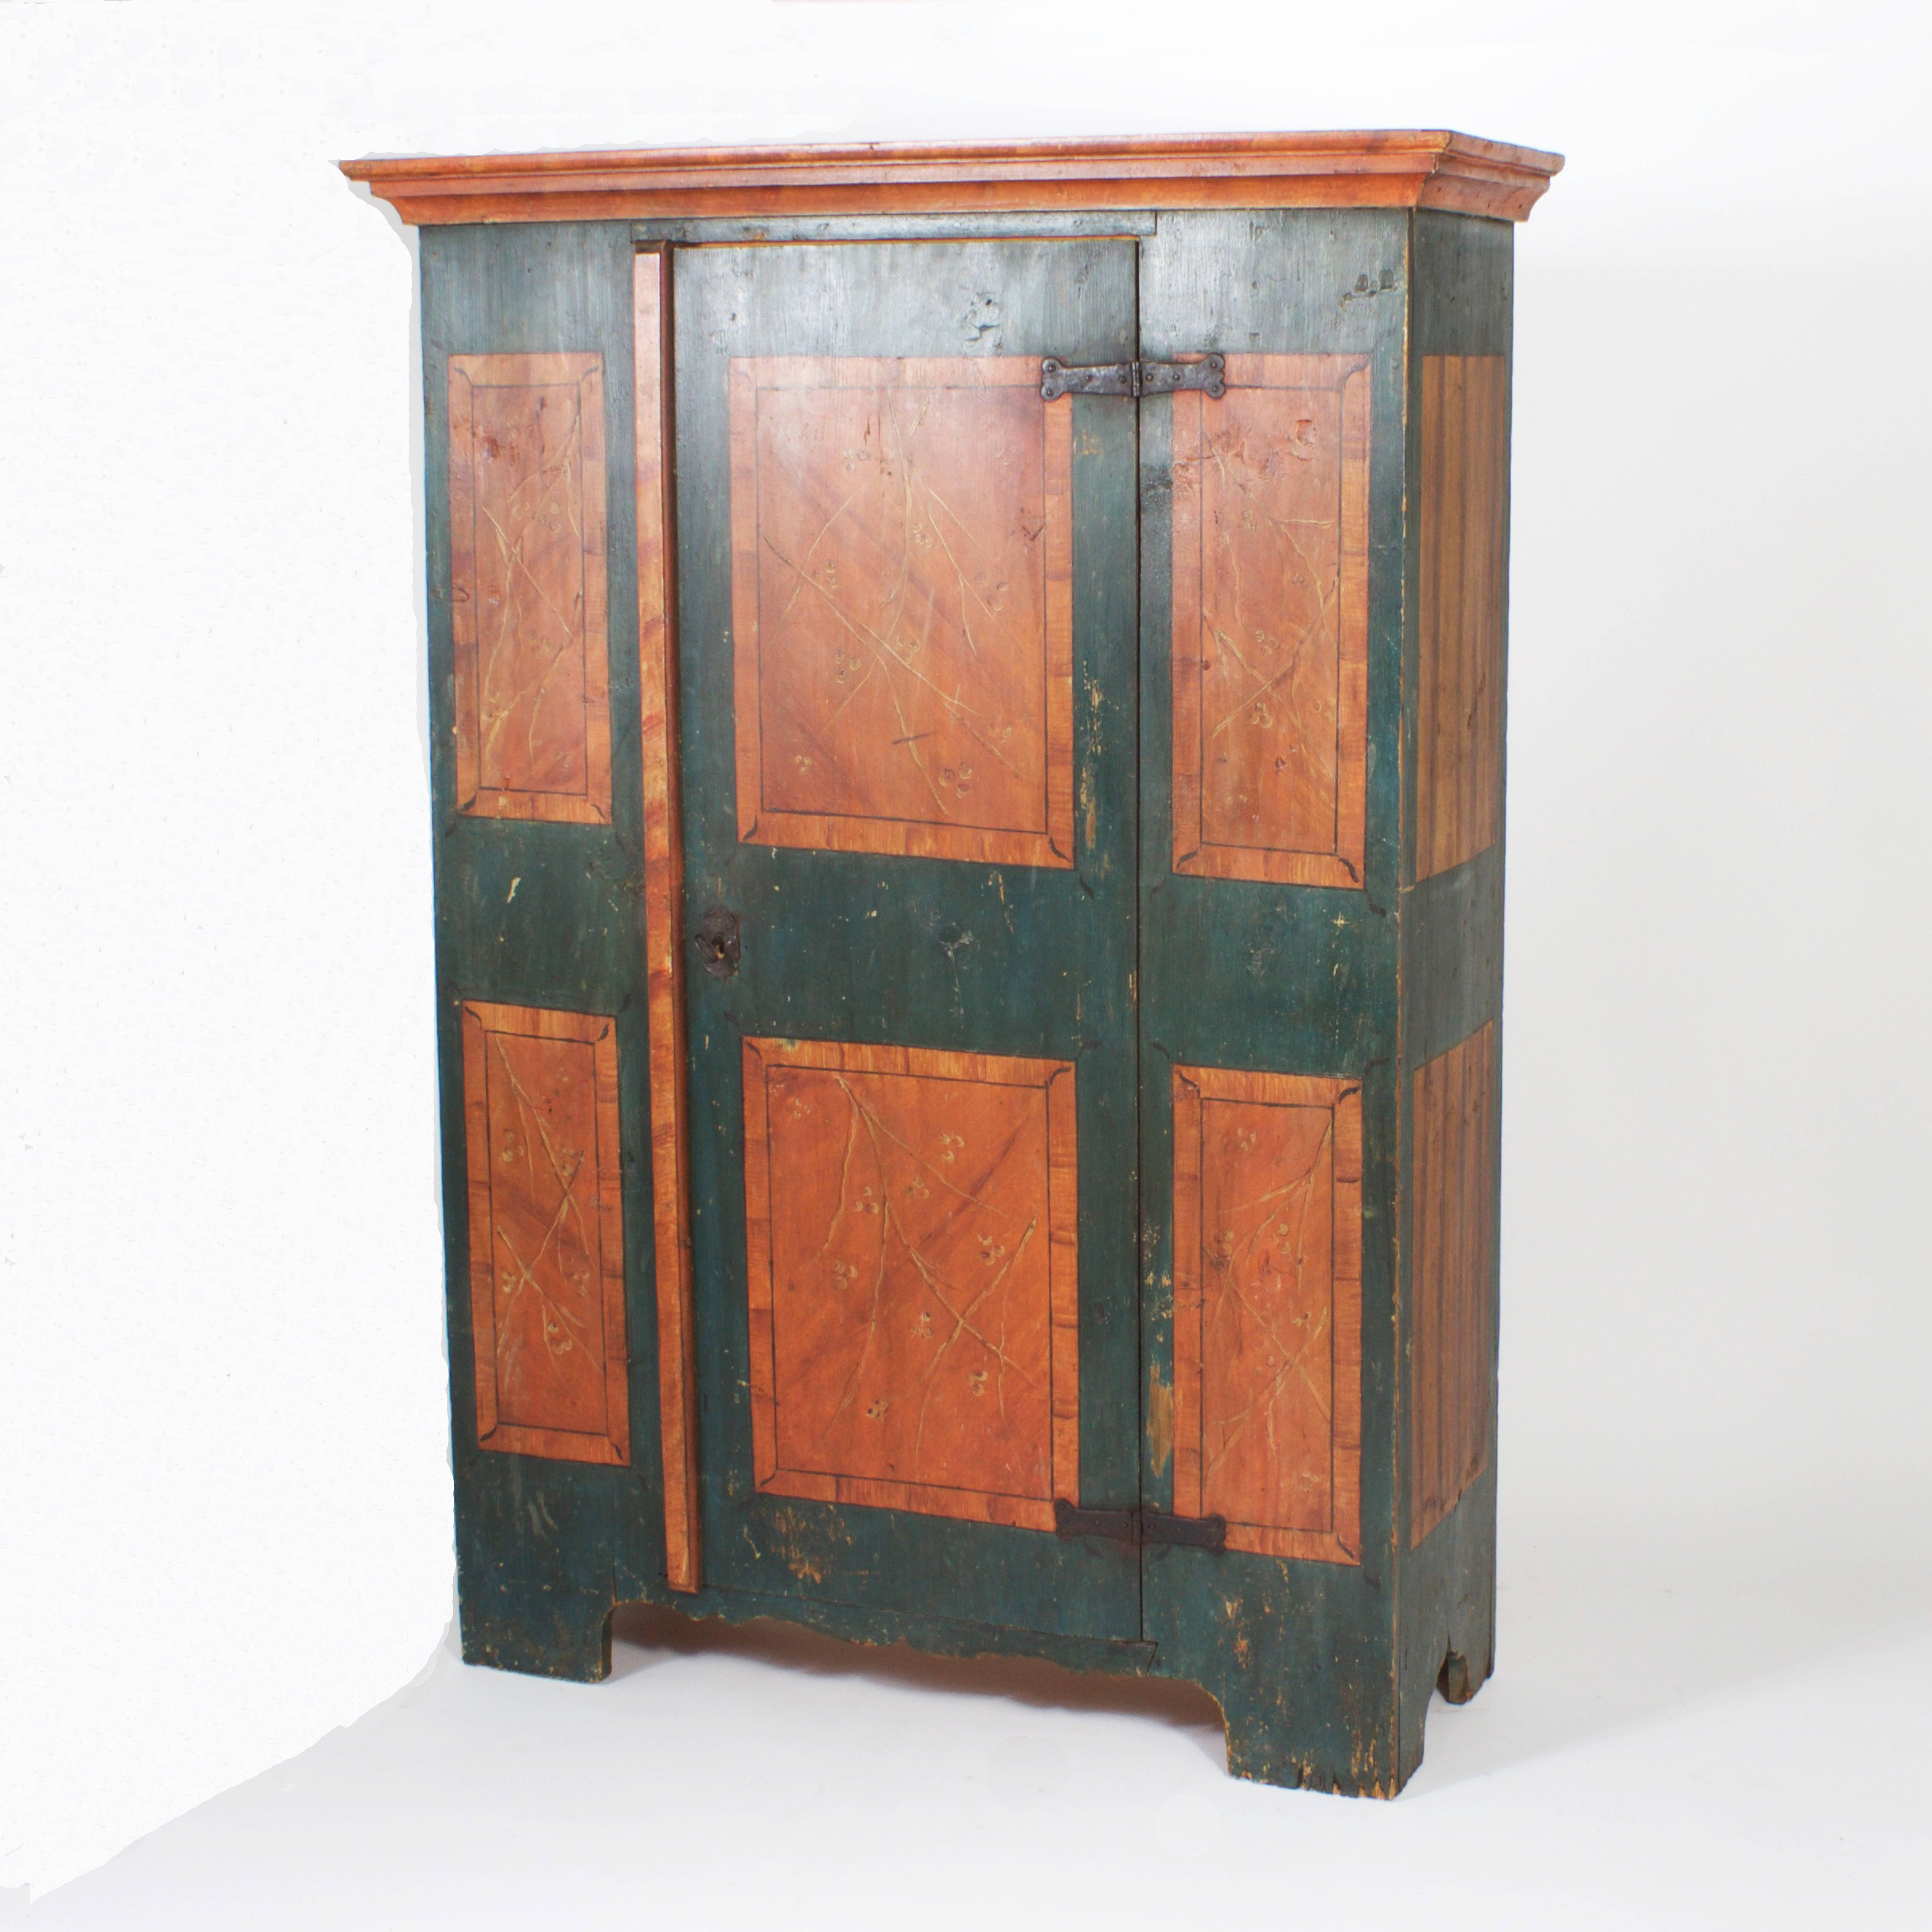 Charming and Primitive pine cabinet or armoire with the original paint and decorative trompe l'ceil style painted panels of twigs and flowers in browns and tans. Having a classical cornice at the top, hand-hammered iron hardware and scalloped arches